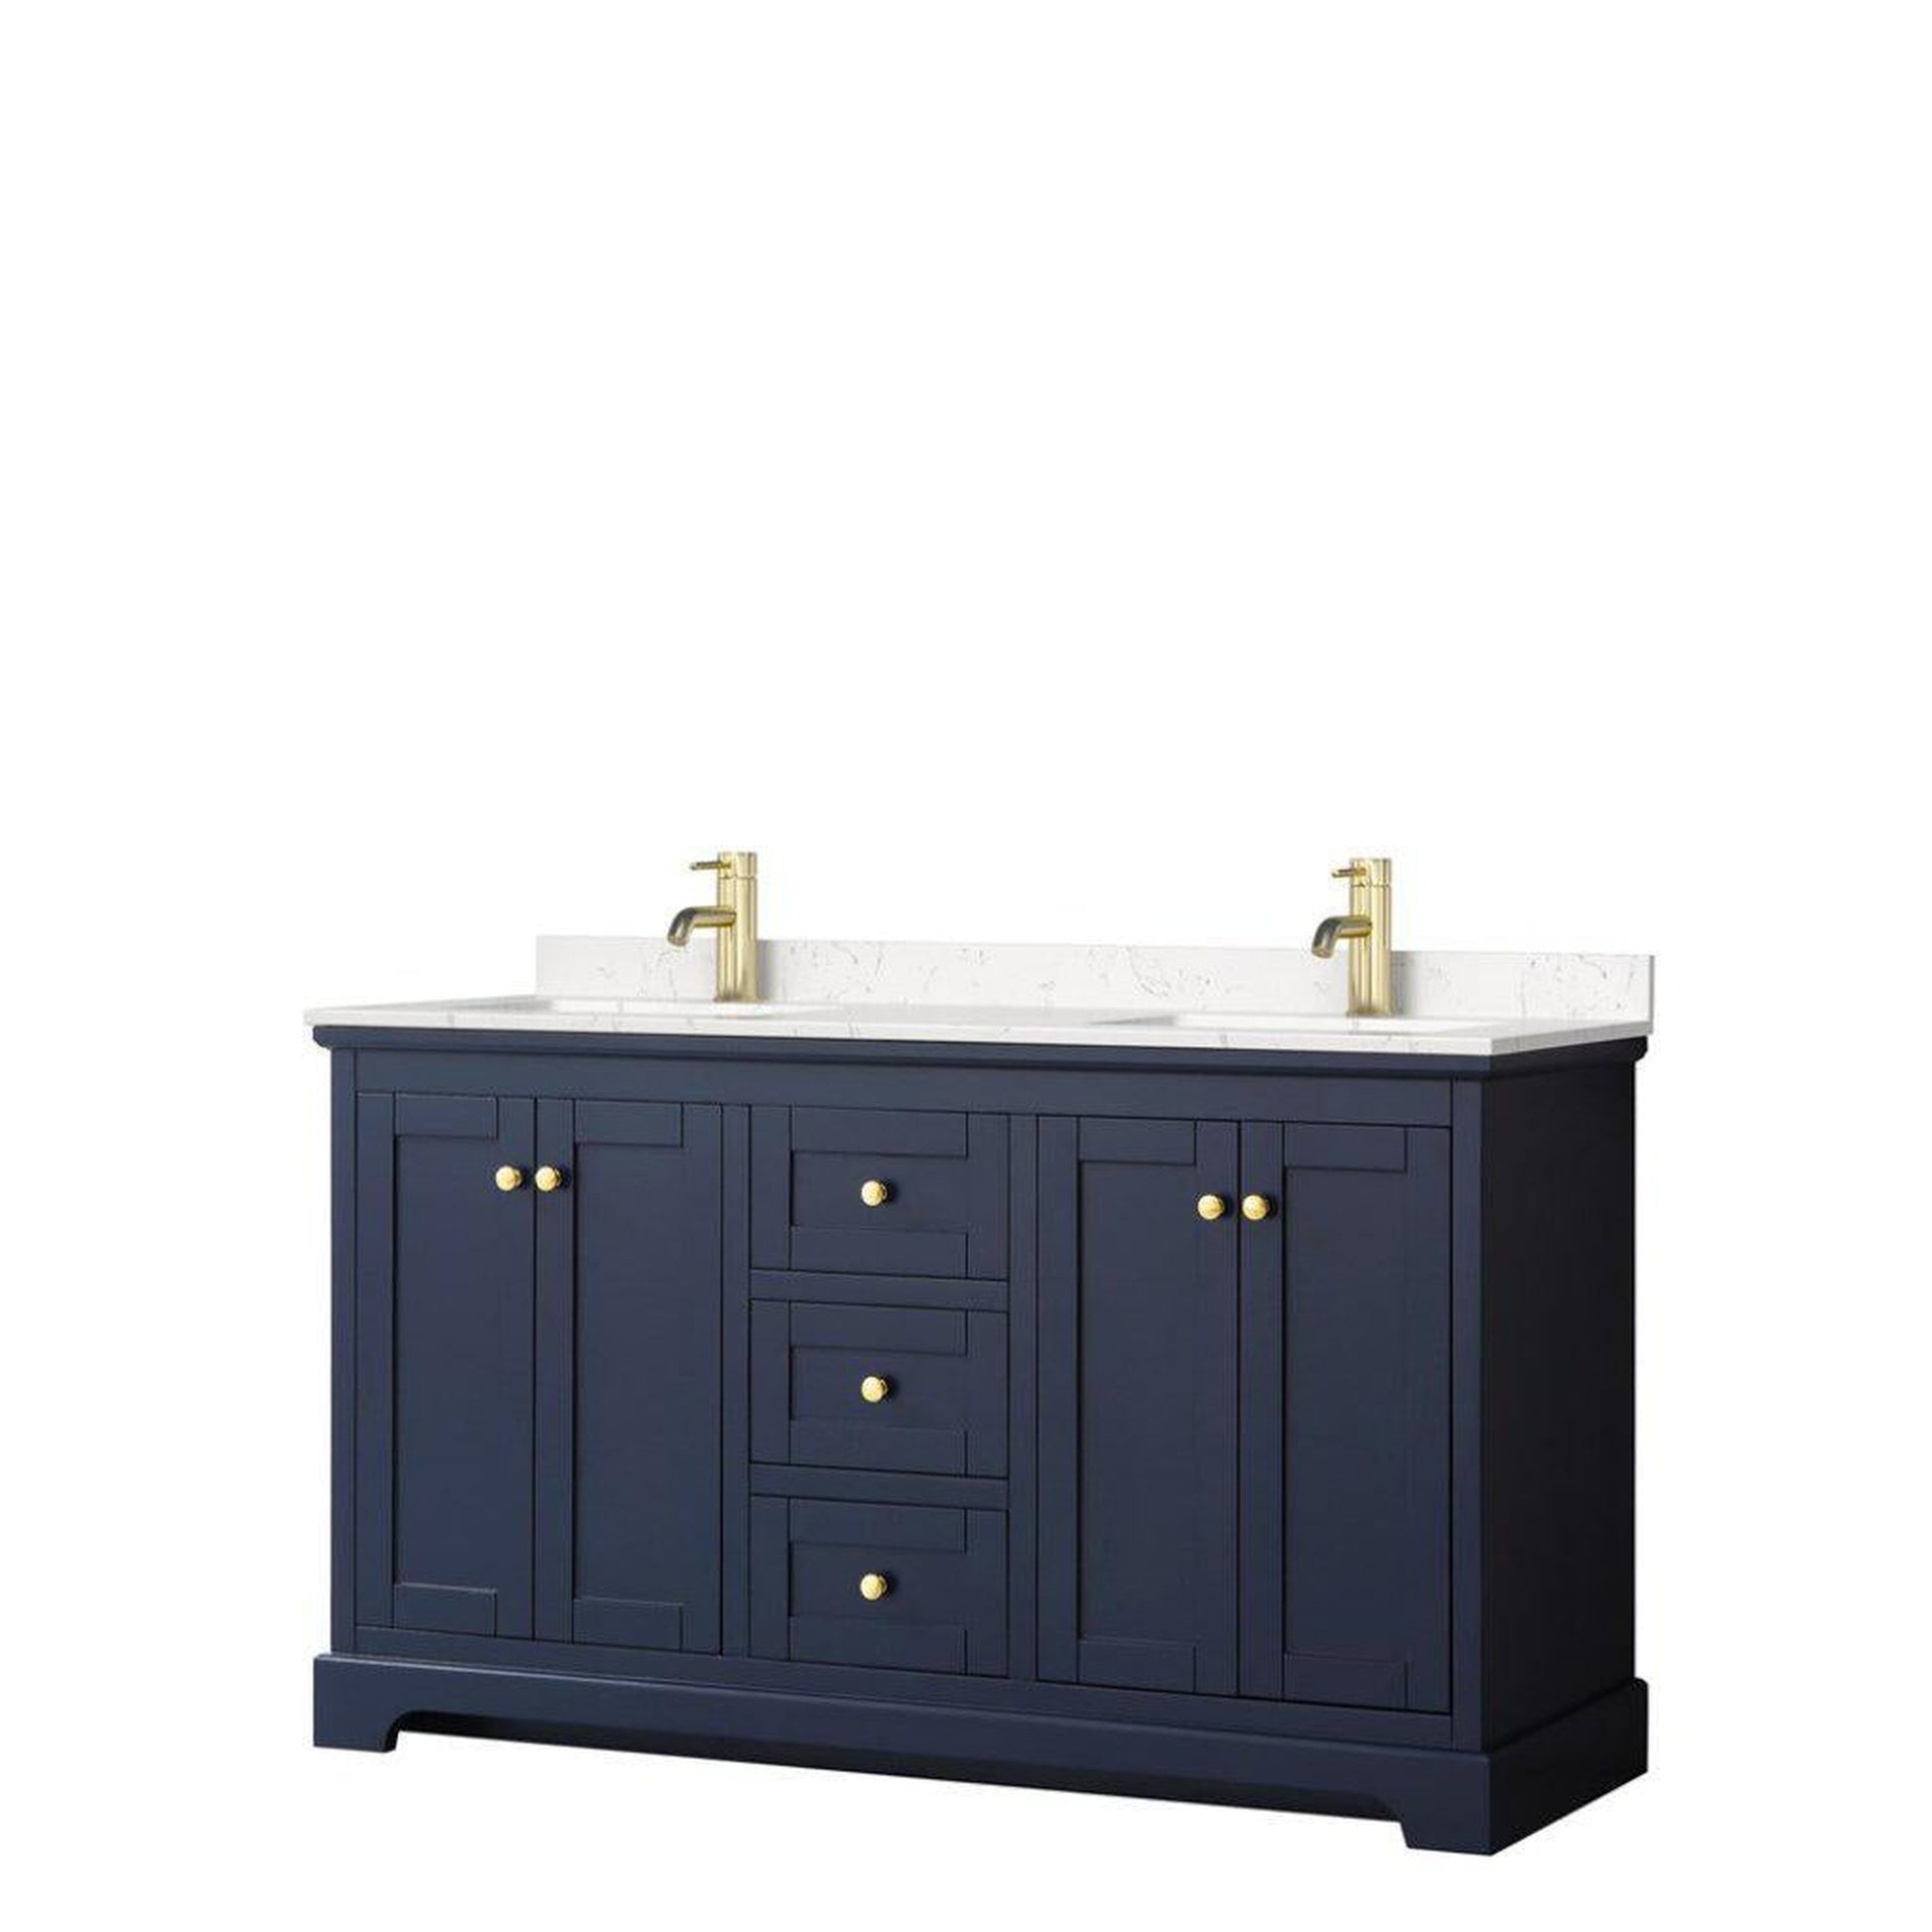 Wyndham Collection Avery 60" Dark Blue Double Bathroom Vanity With Light-Vein Cultured Marble Countertop With 1-Hole Faucet And Square Sink